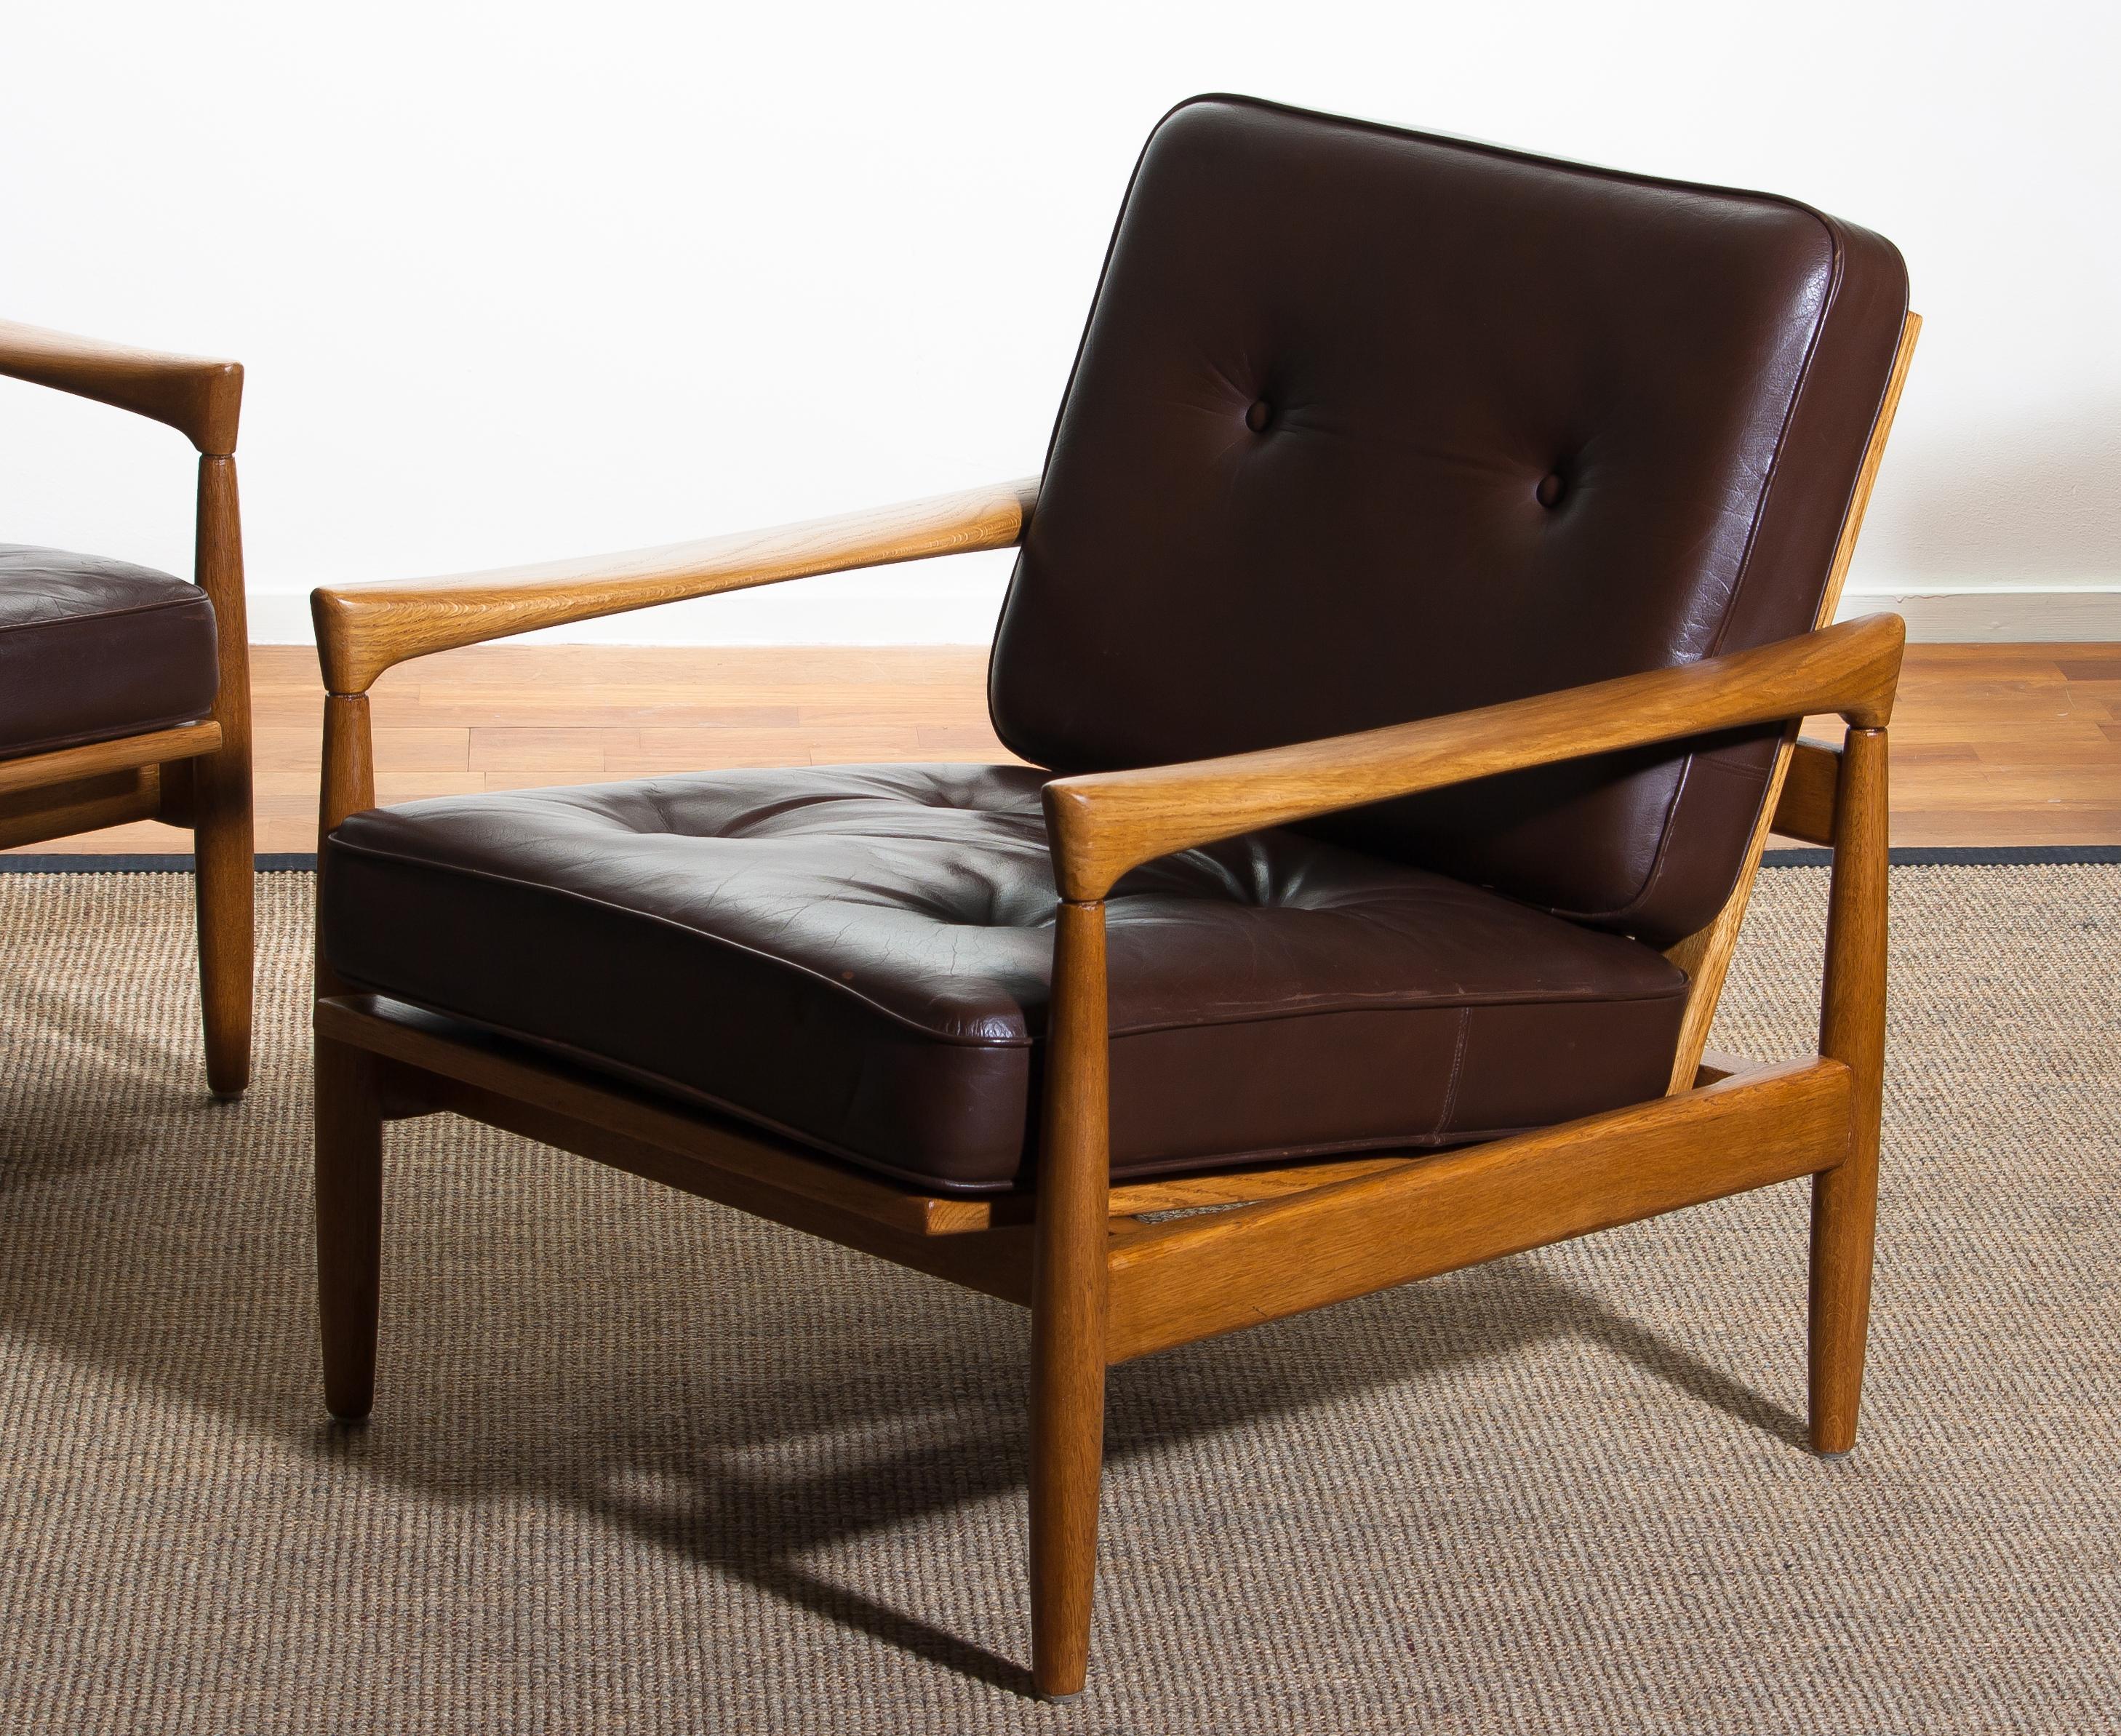 Mid-Century Modern 1960s, Set of Two Oak and Brown Leather Easy or Lounge Chairs by Erik Wörtz